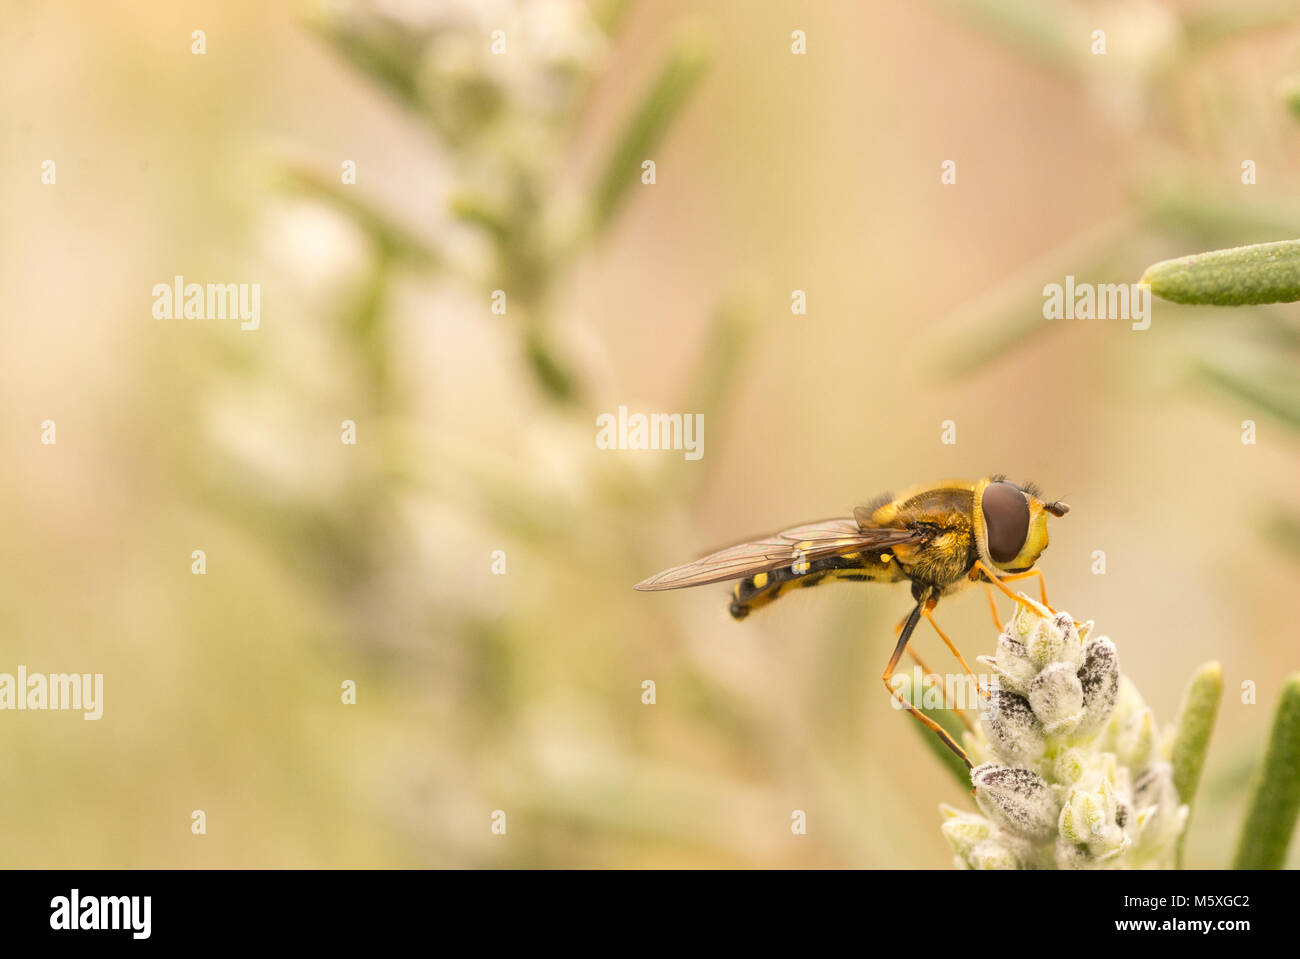 close up of a Hoverfly (Eupeodes) perched on a rosemary bud Stock Photo